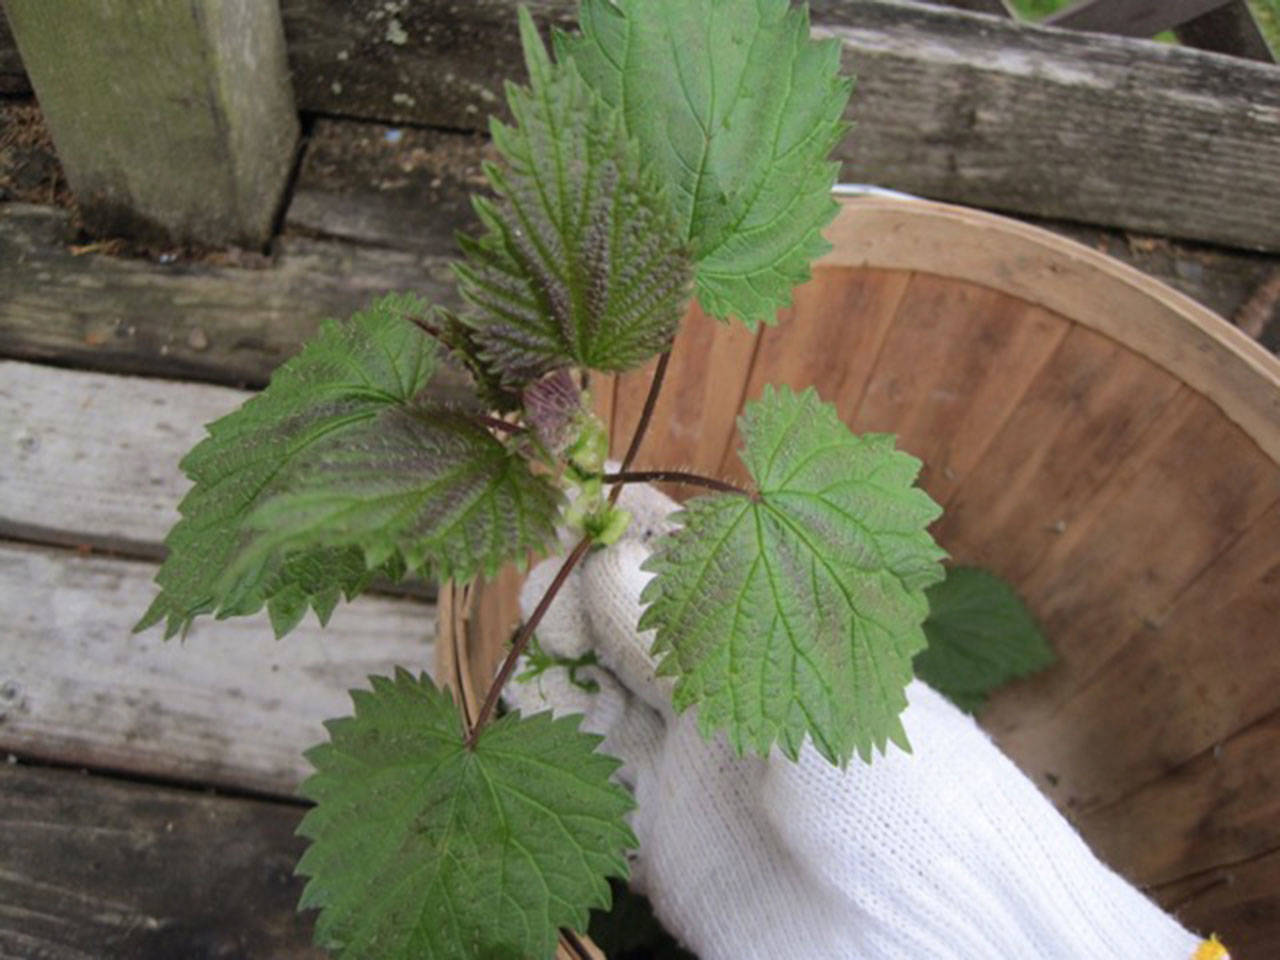 Last year’s nettles sit in a basket after being picked. When you harvest nettles, wear gloves and then wash and destem them. Once nettles are cooked, they lose their sting. (Betsy Wharton/for Peninsula Daily News)